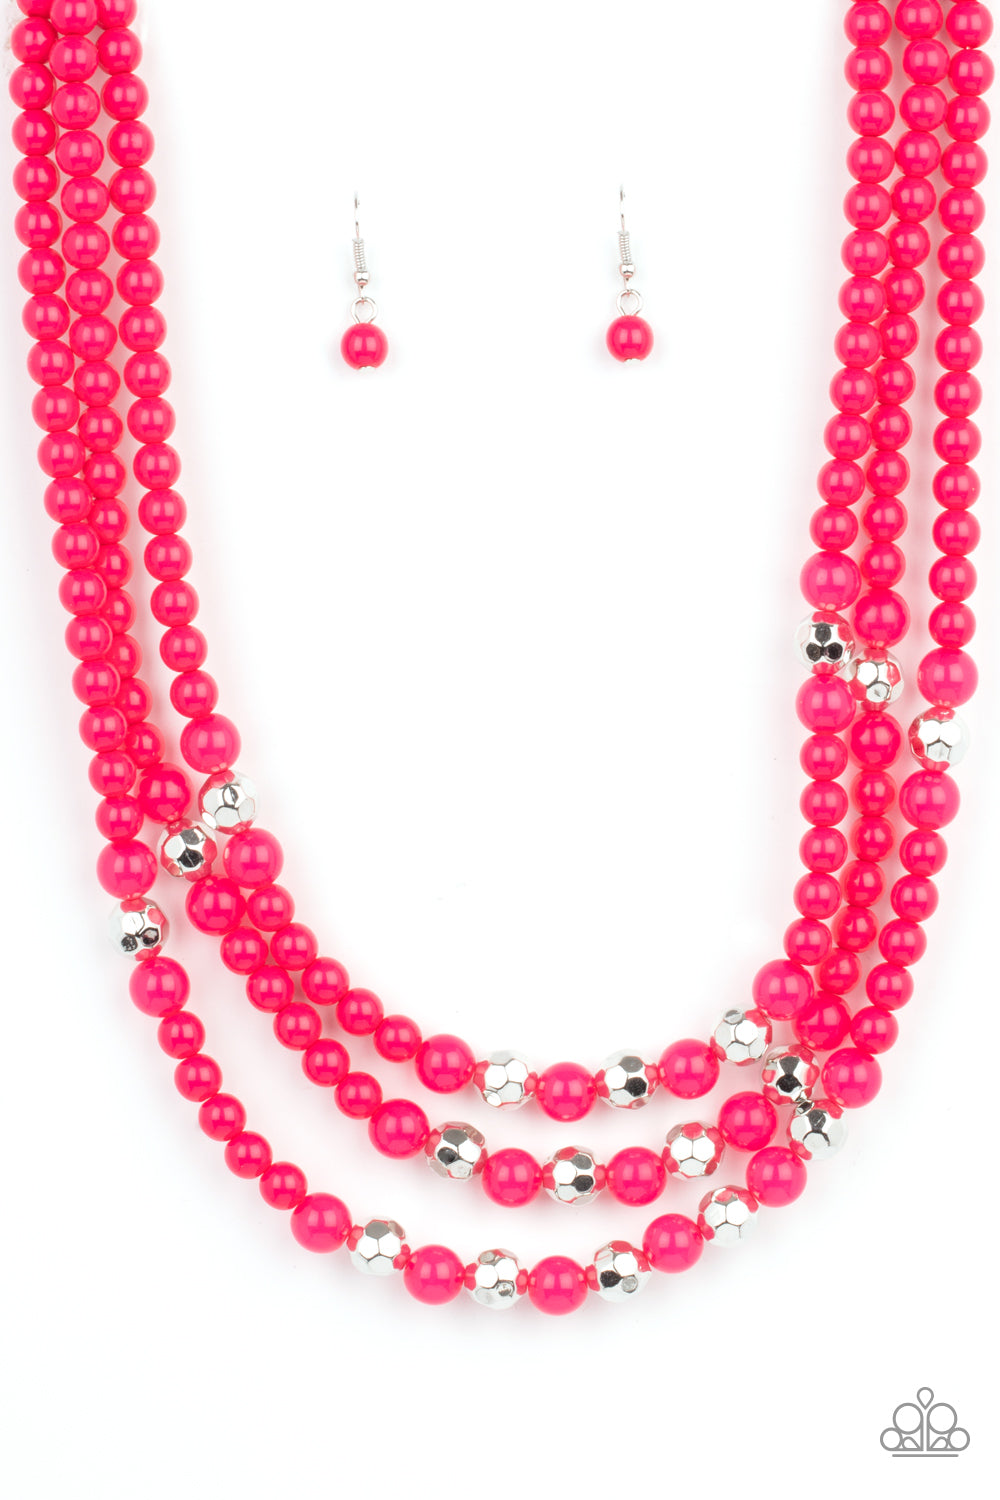 five-dollar-jewelry-staycation-all-i-ever-wanted-pink-necklace-paparazzi-accessories